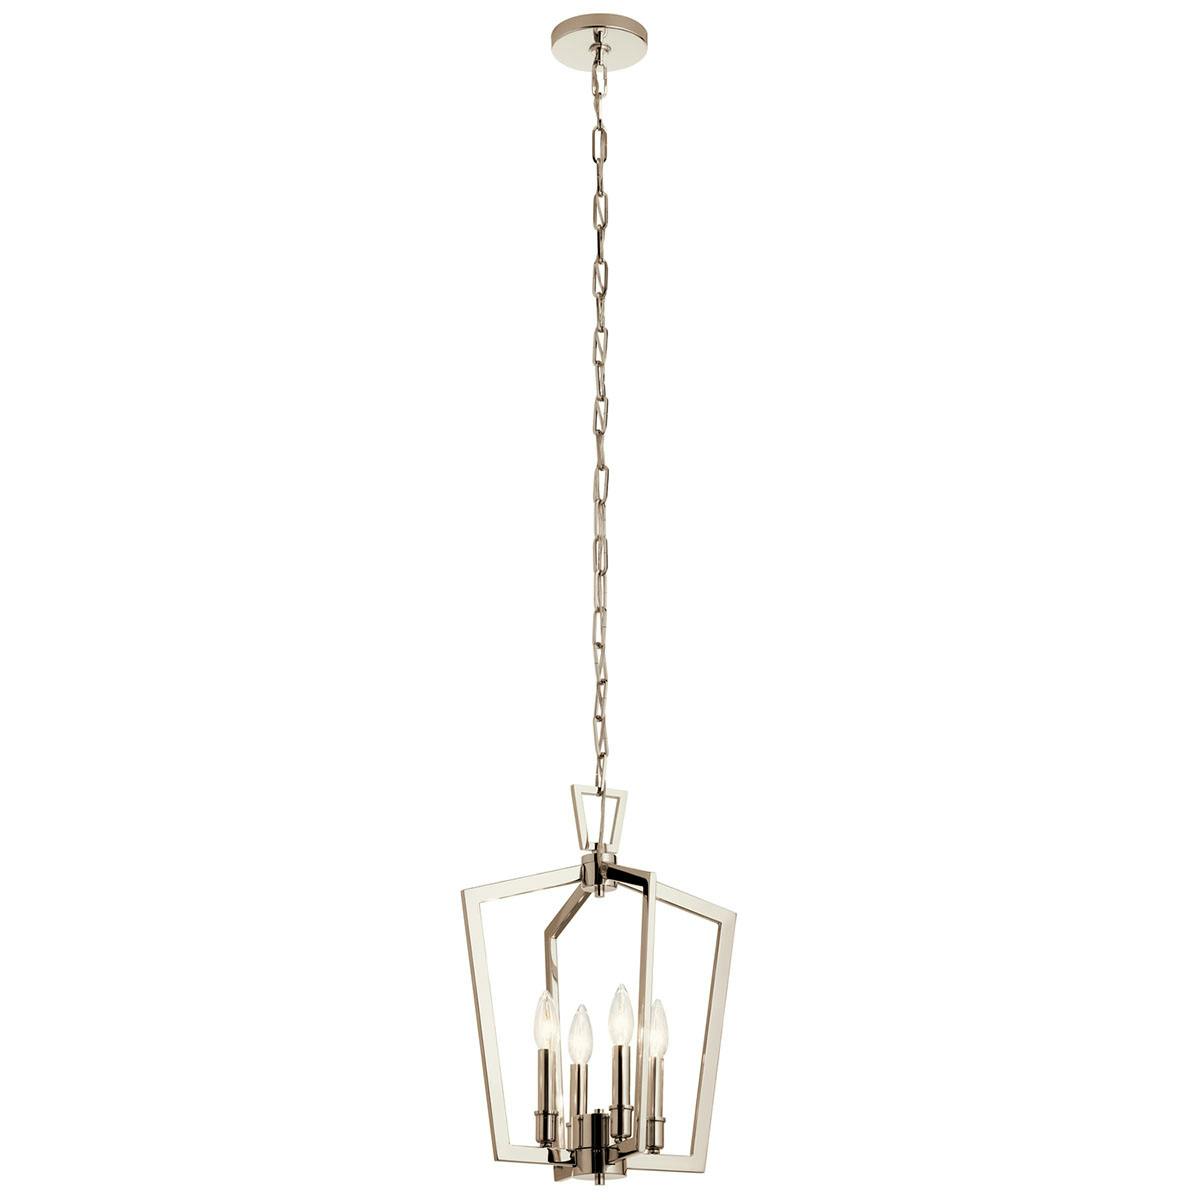 Abbotswell 19" 4 Light Pendant Nickel on a white background